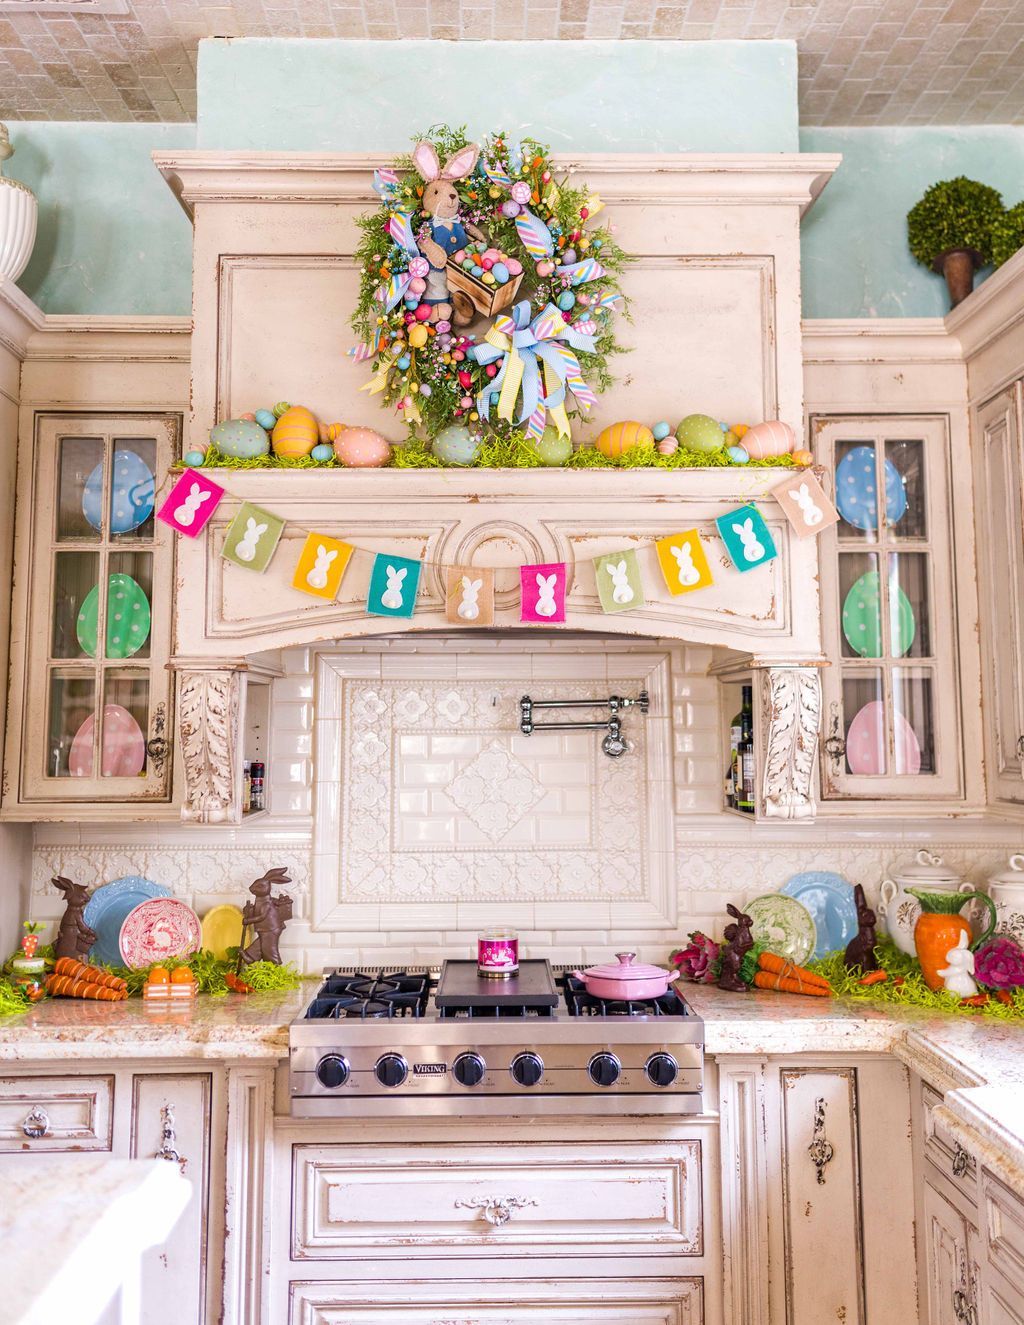 3 Easy Steps to Create an Easter Kitchen! - 3 Easy Steps to Create an Easter Kitchen! -   30 Easter Decor Ideas for the Home